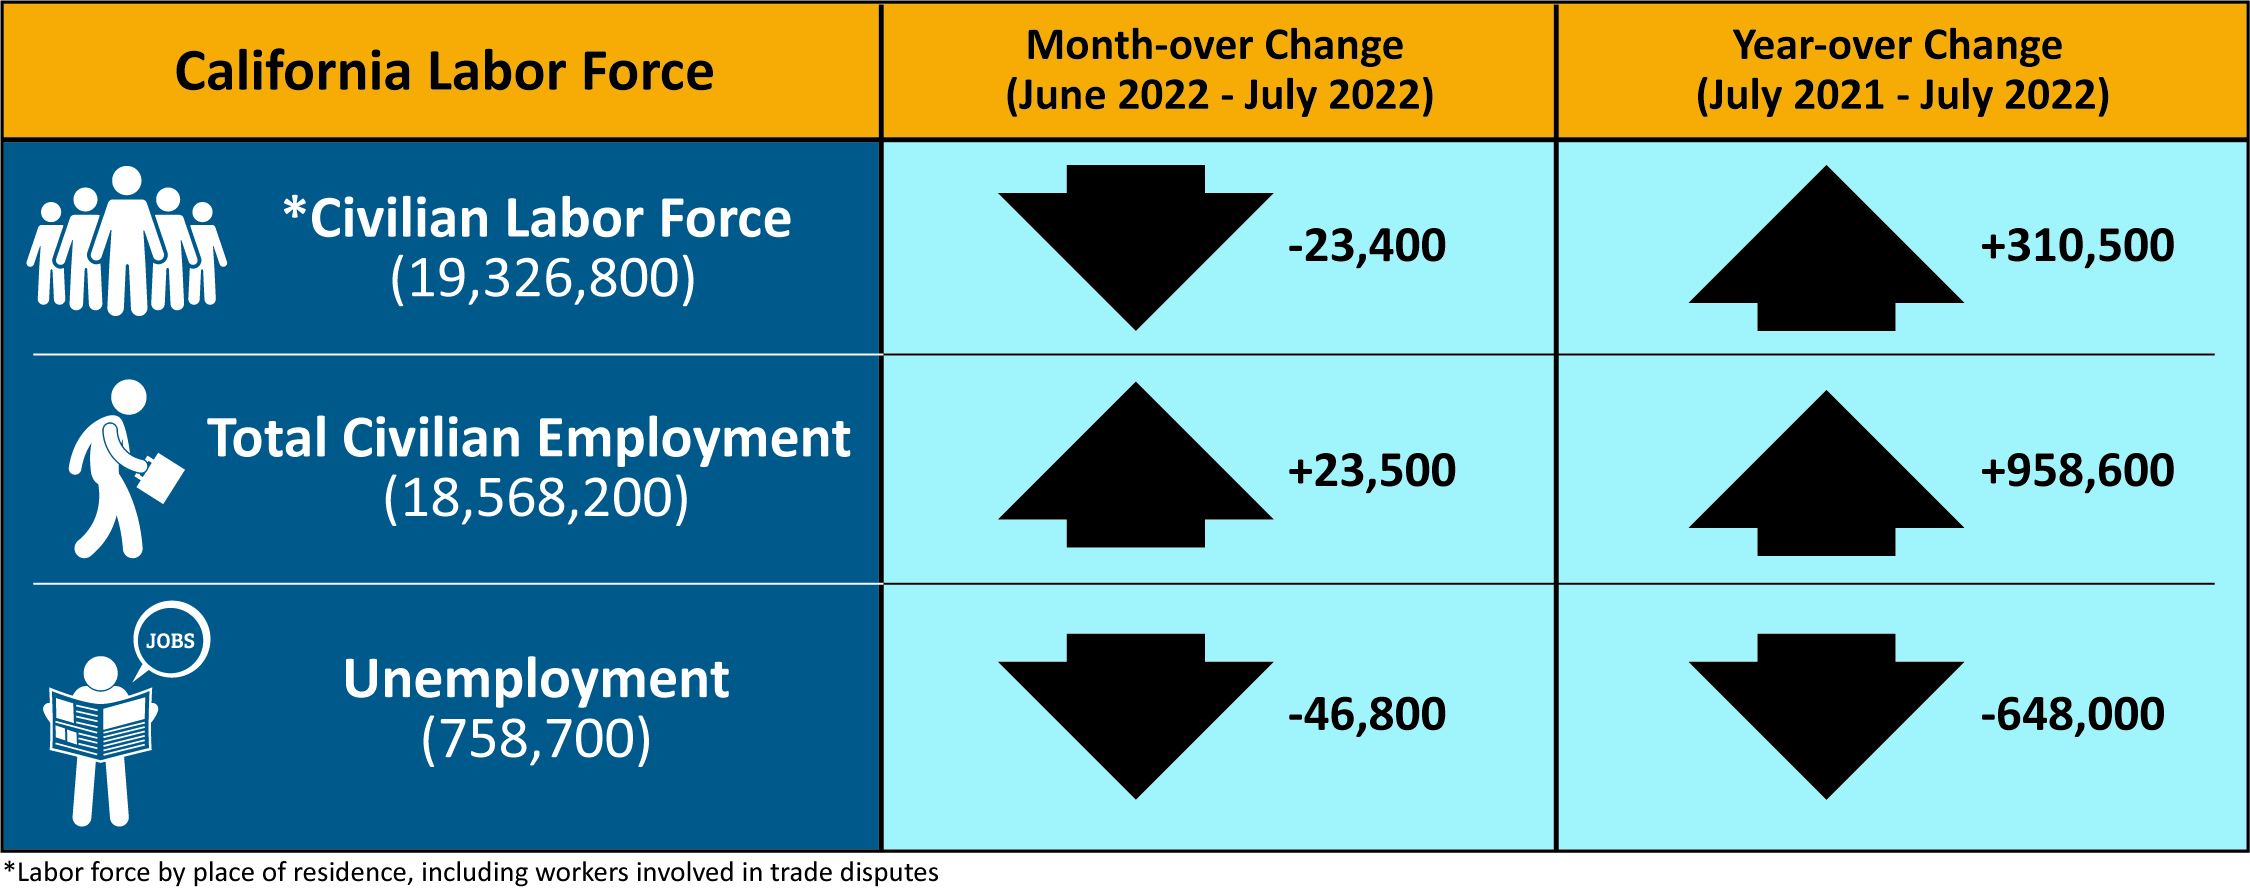 This table summarizes data from the prior text and adds that the civilian labor force (which is the labor force by place of residence, including workers involved in trading disputes) totaling 19,326,800 in July 2022, down 23,400 from June 2022, but up 310,500 from July of last year.